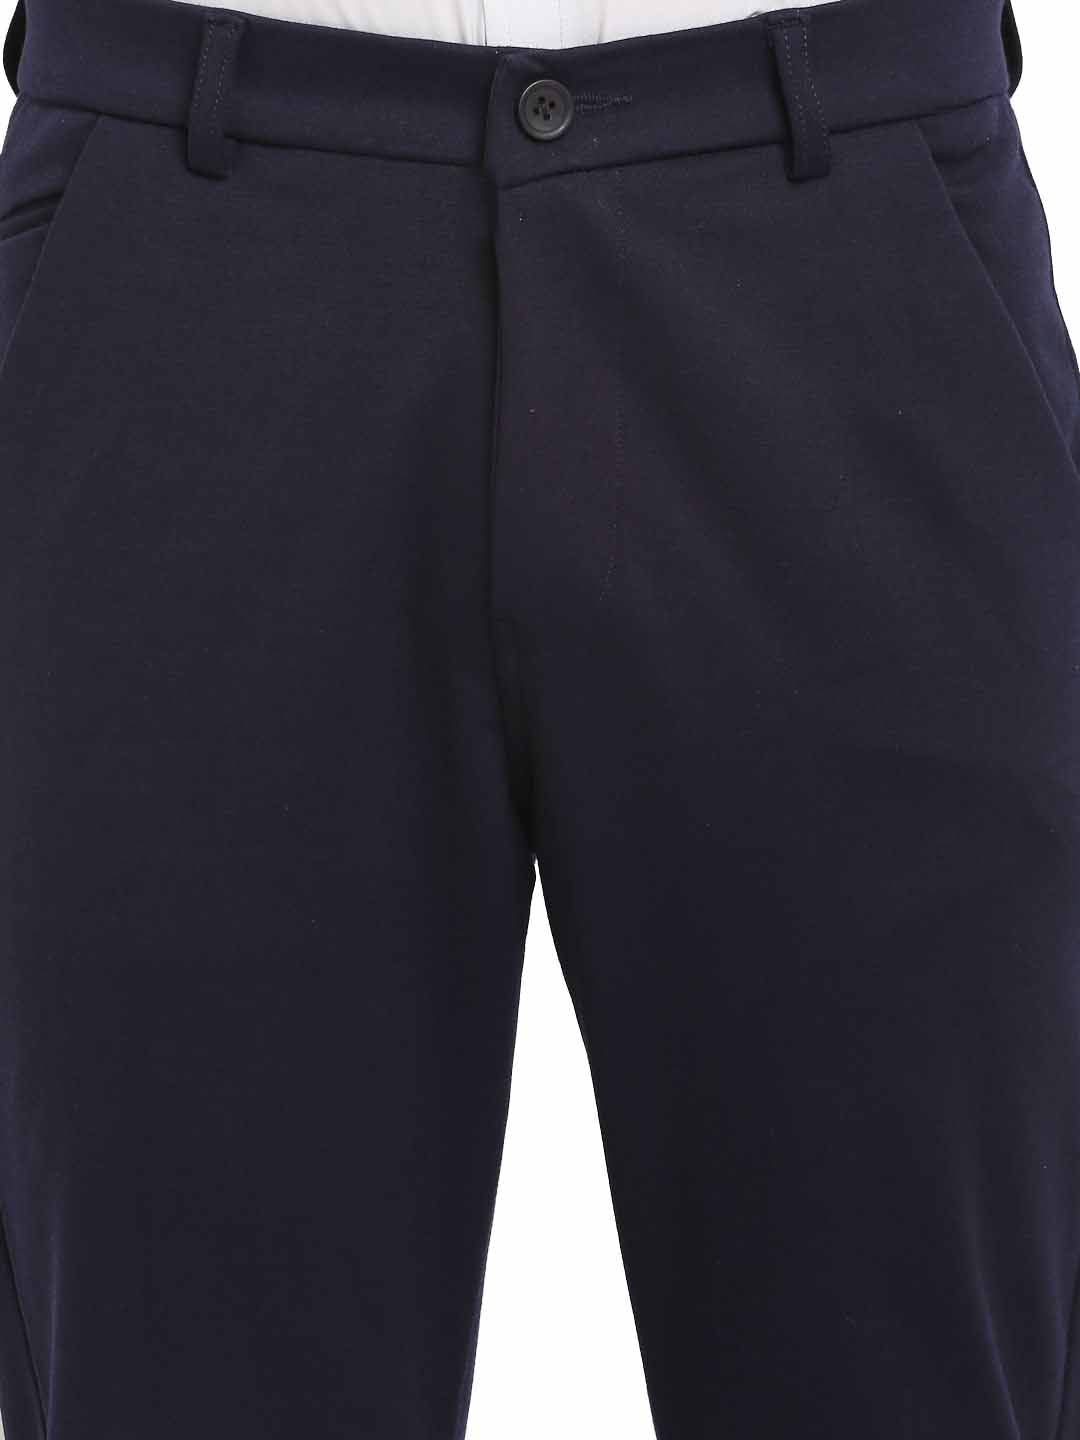 Men's Navy Blue 4-Way Lycra Tapered Fit Trousers ( FGP 269Navy ) - Jainish